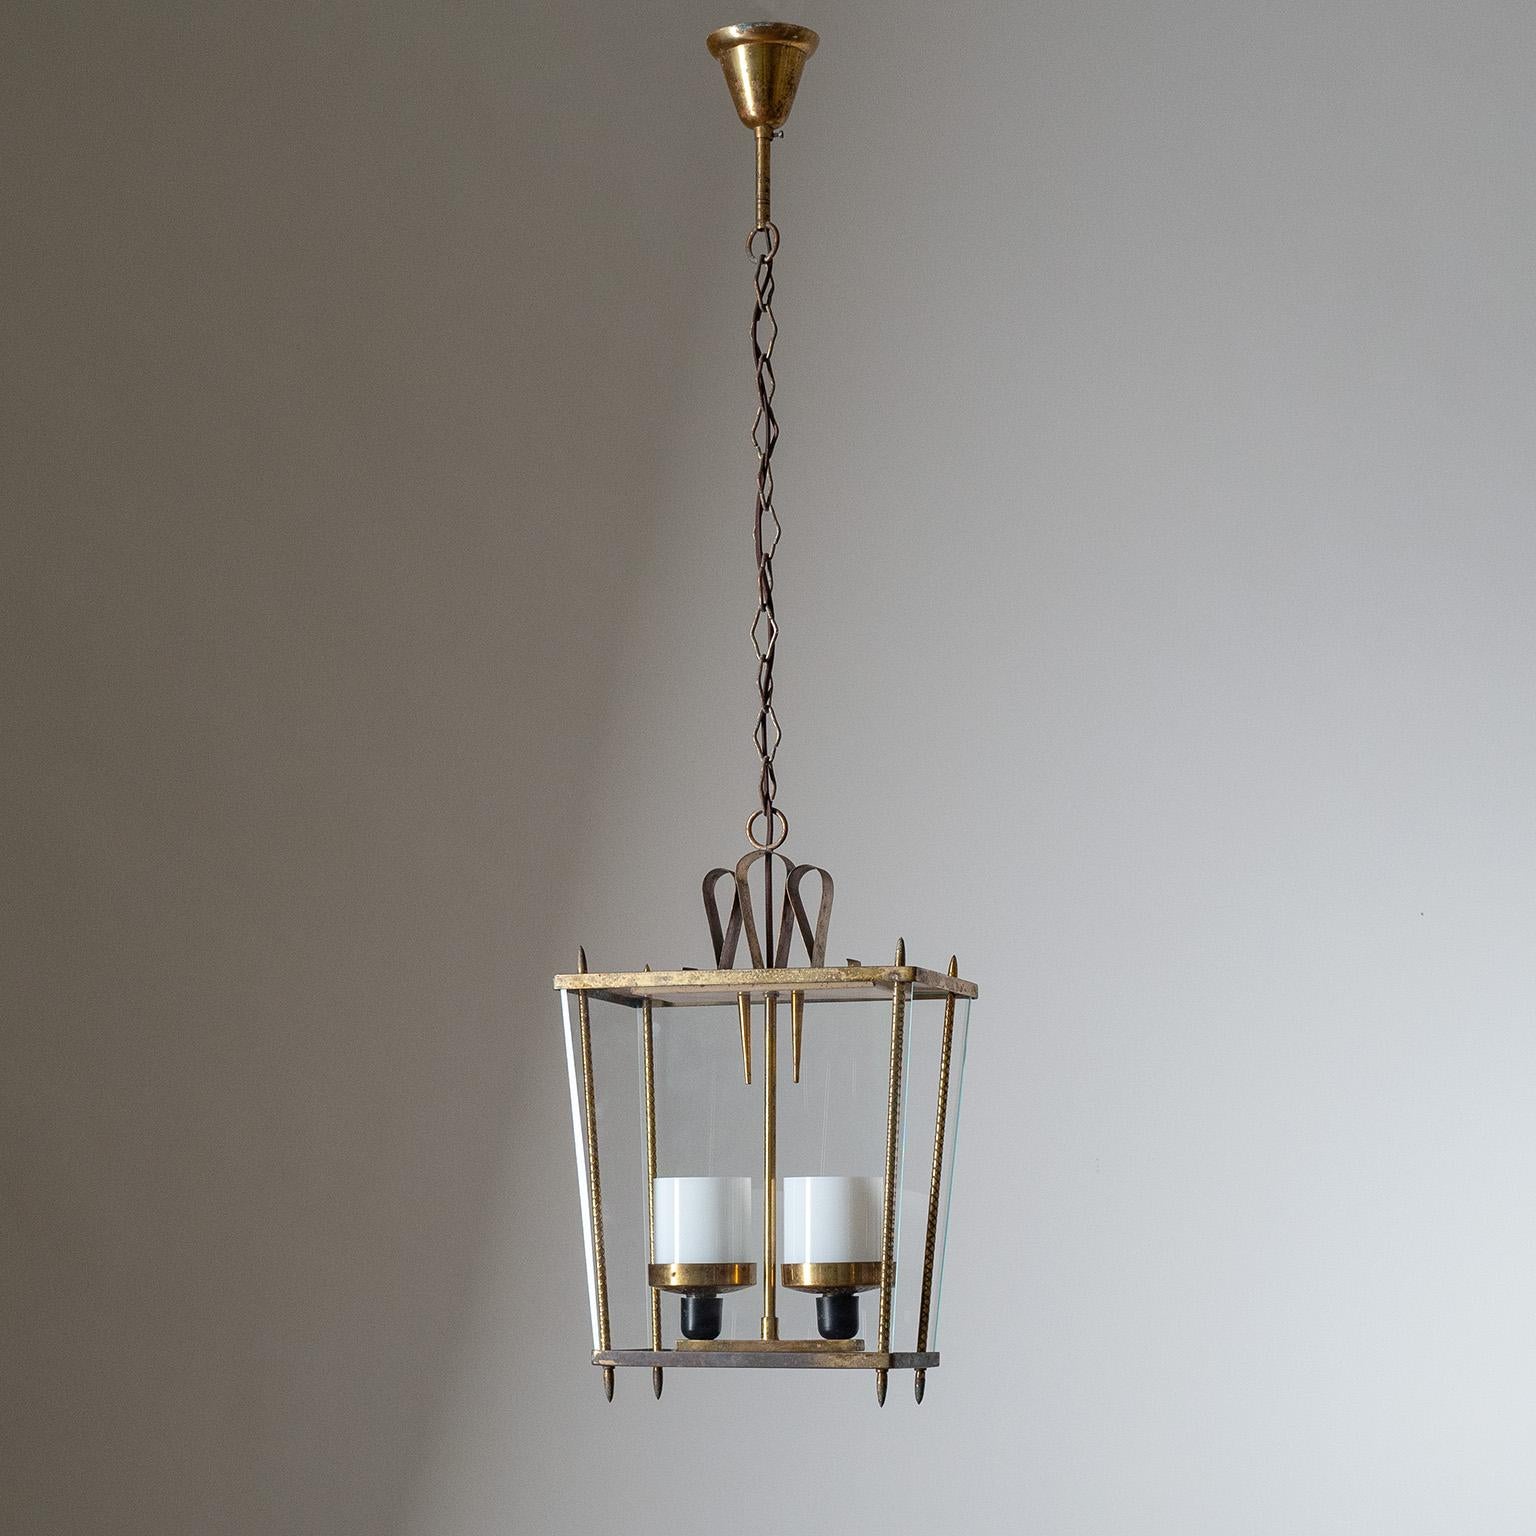 Fine Gio Ponti style Italian lantern from the 1940s. Brass and lacquered steel structure with two glass panes and charming brass decorations. Two original E14 sockets with new wiring and small opaline glass diffusers. Heavy patina throughout the